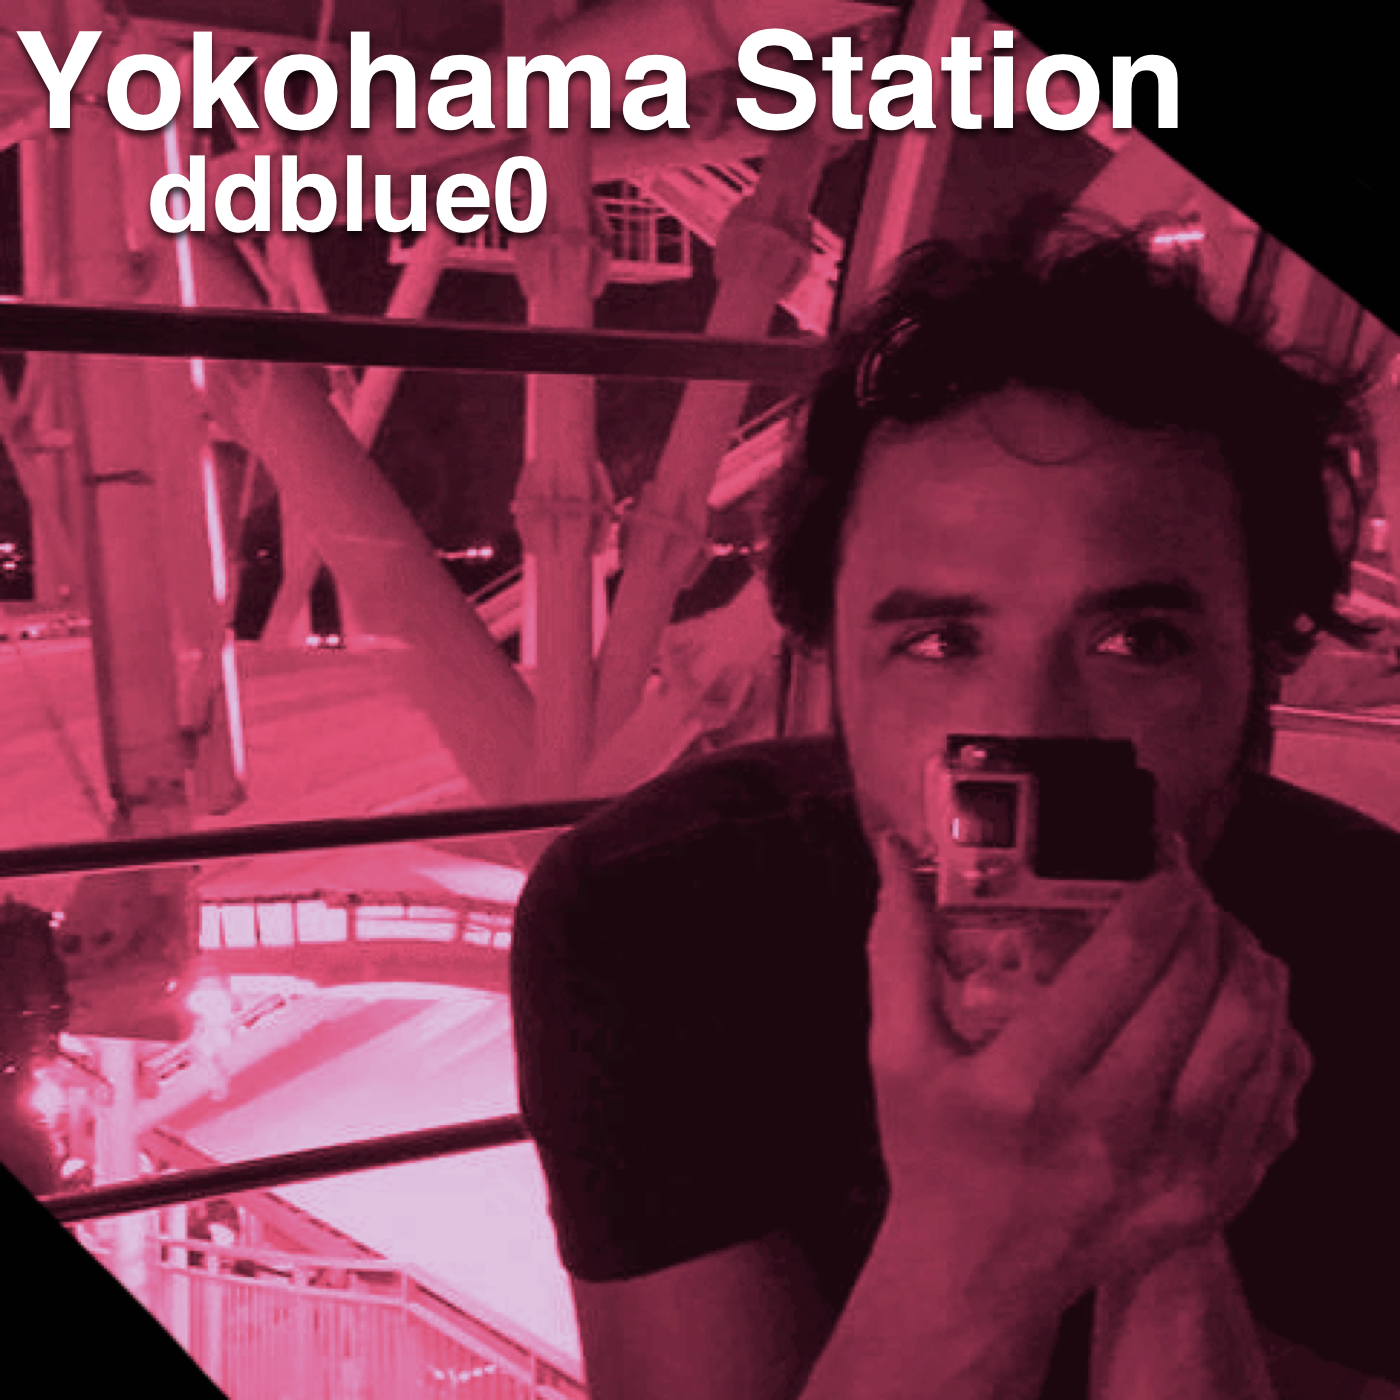 A picture of a man holding a camera representing the Yokohama Station project